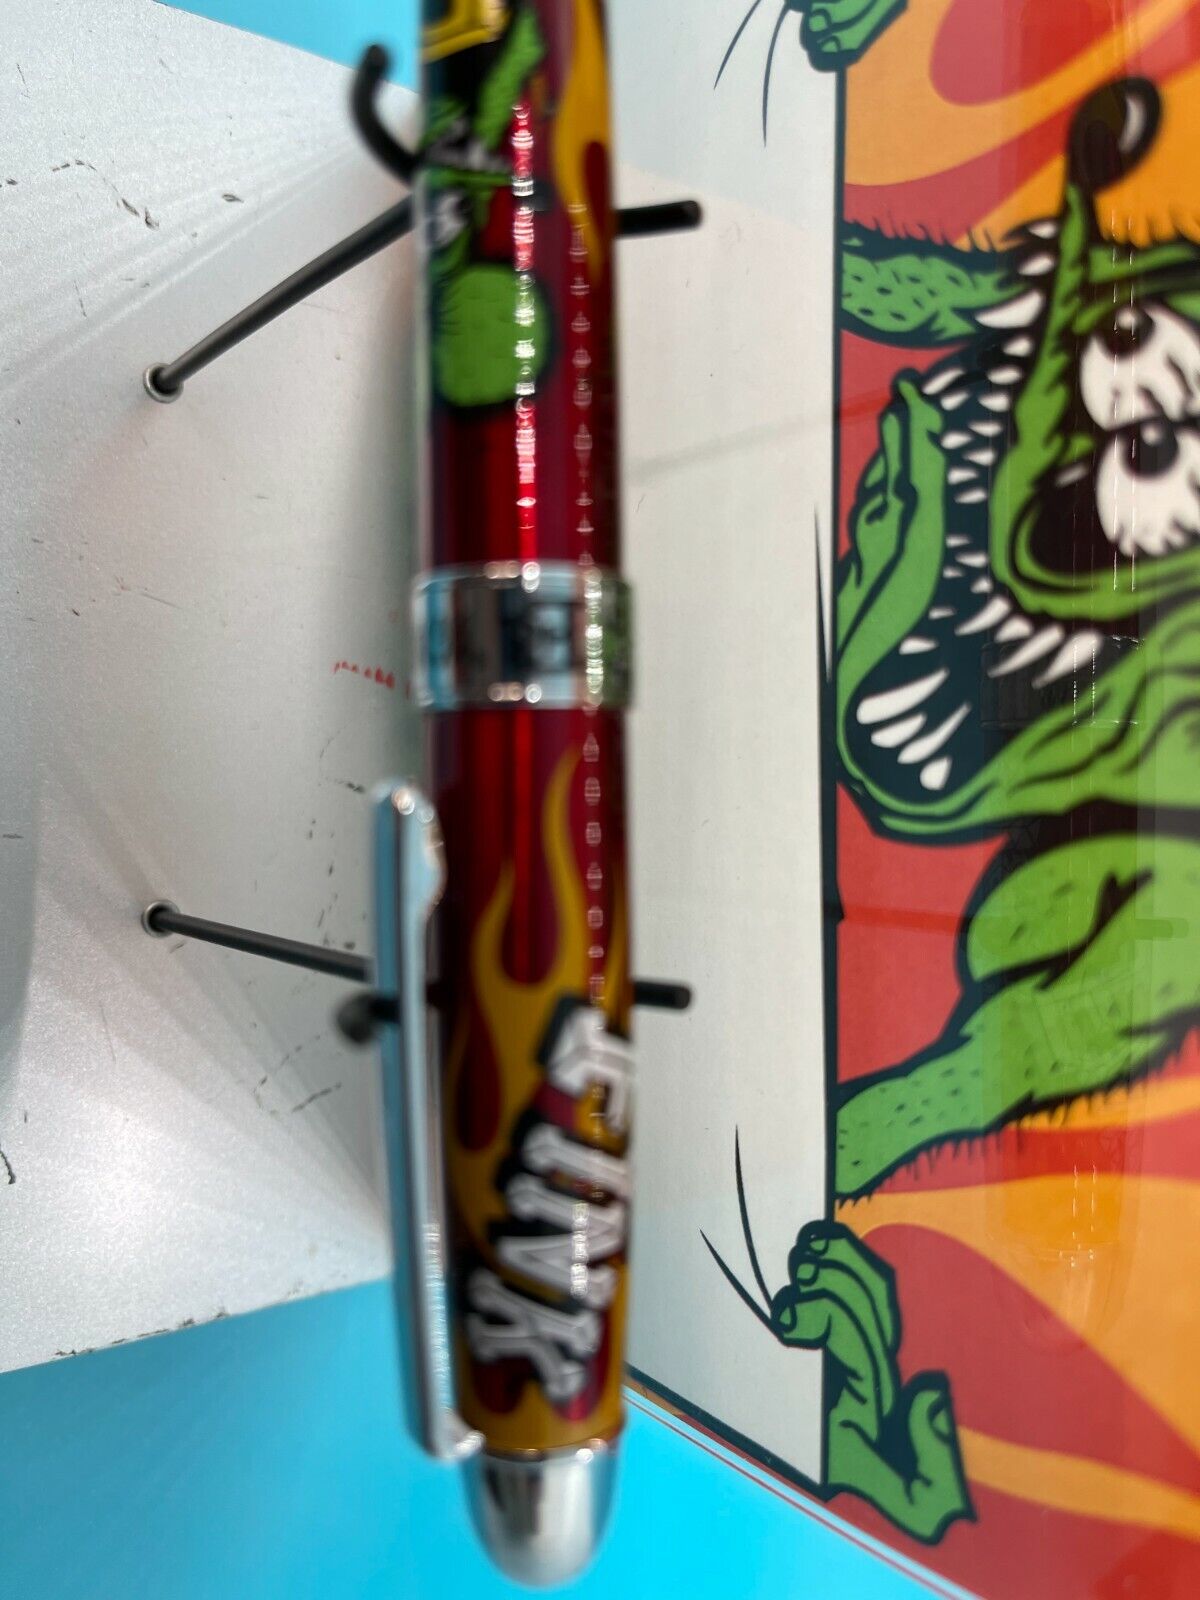 ACME Rat Fink Big Daddy Rollerball Pen with Display, Low Number #5/1963